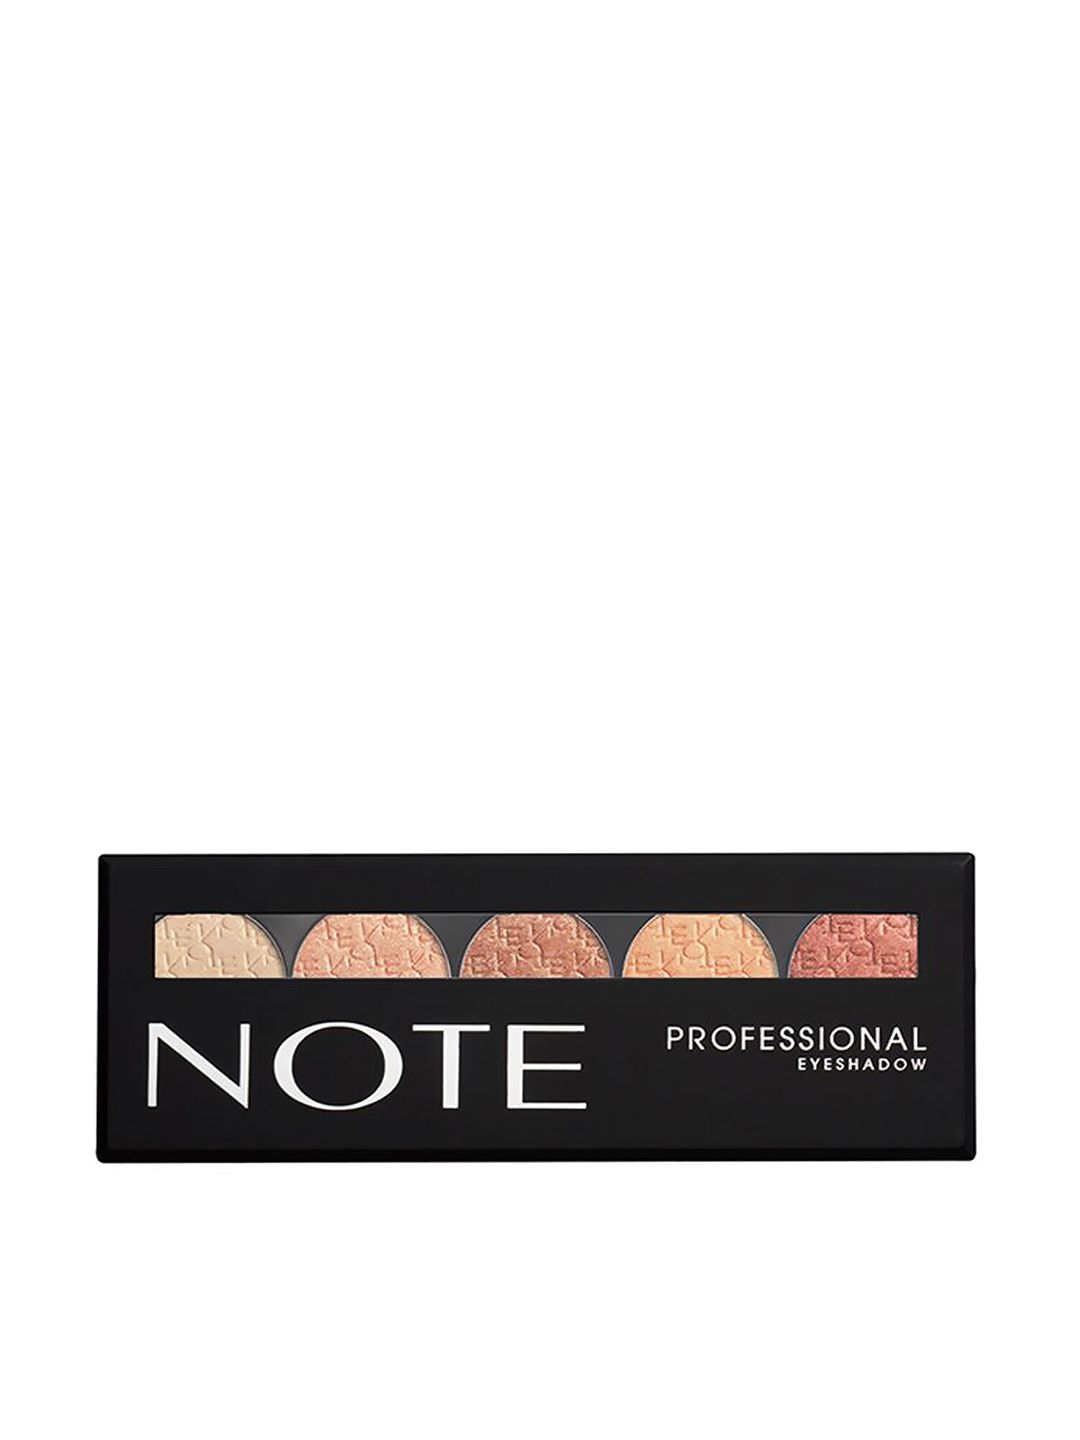 Note Professional Eyeshadow 106 10 g Price in India